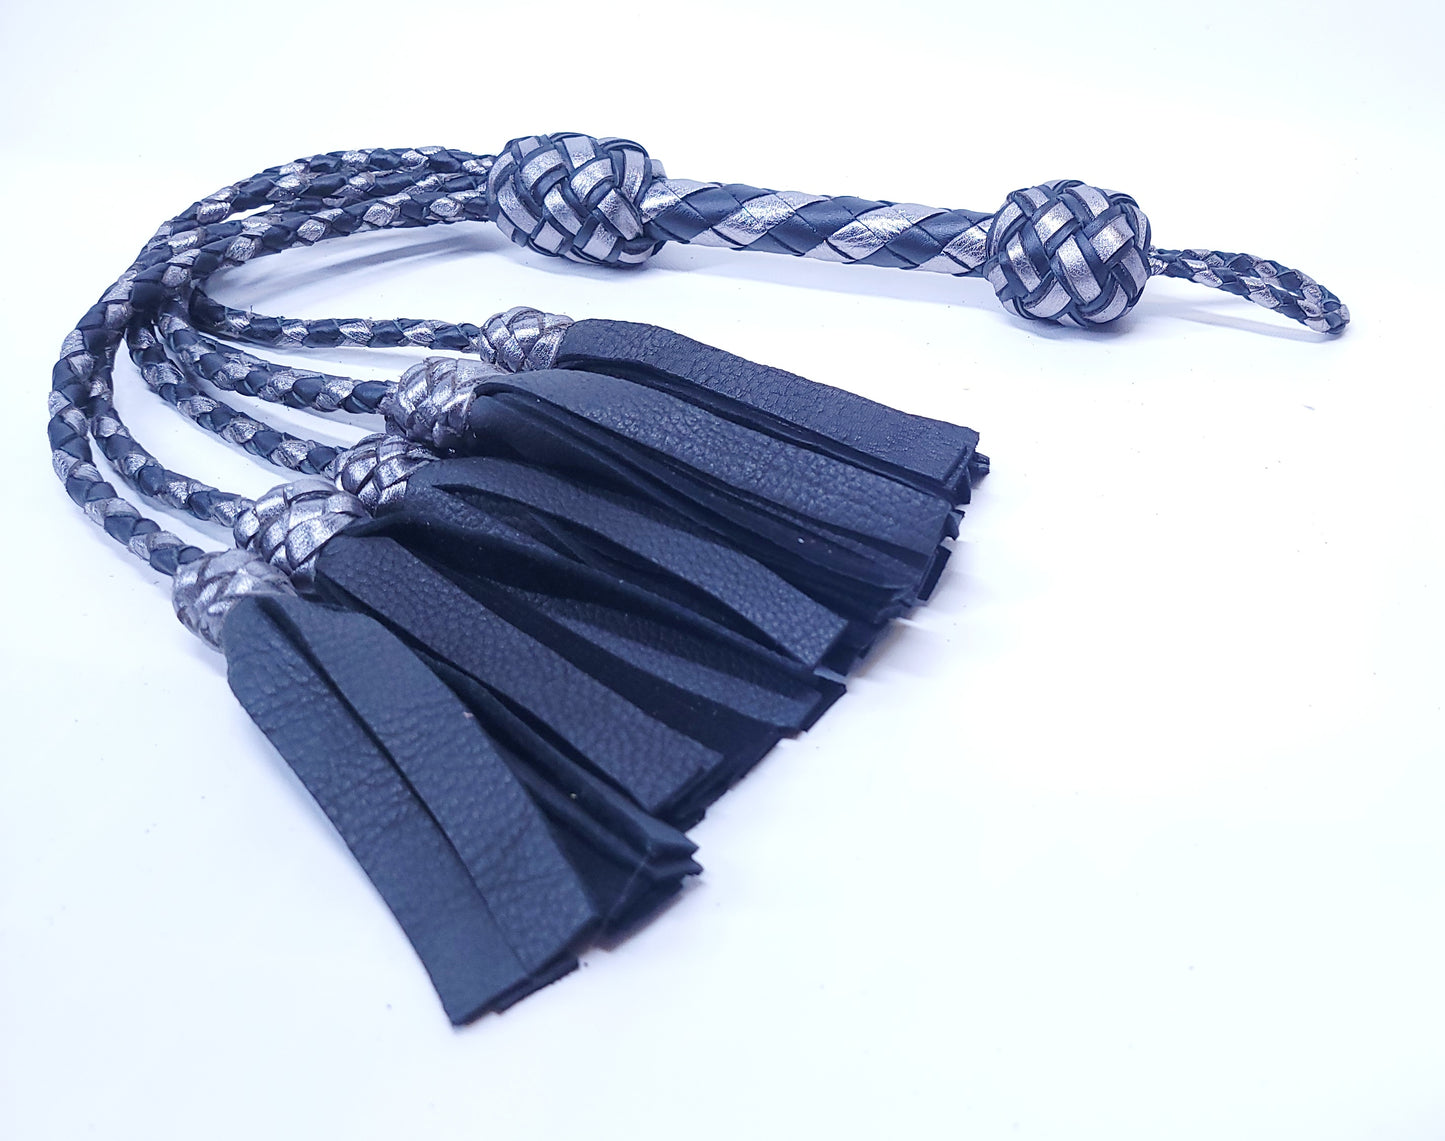 Black and Silver Deerskin Thumper- Made to Order